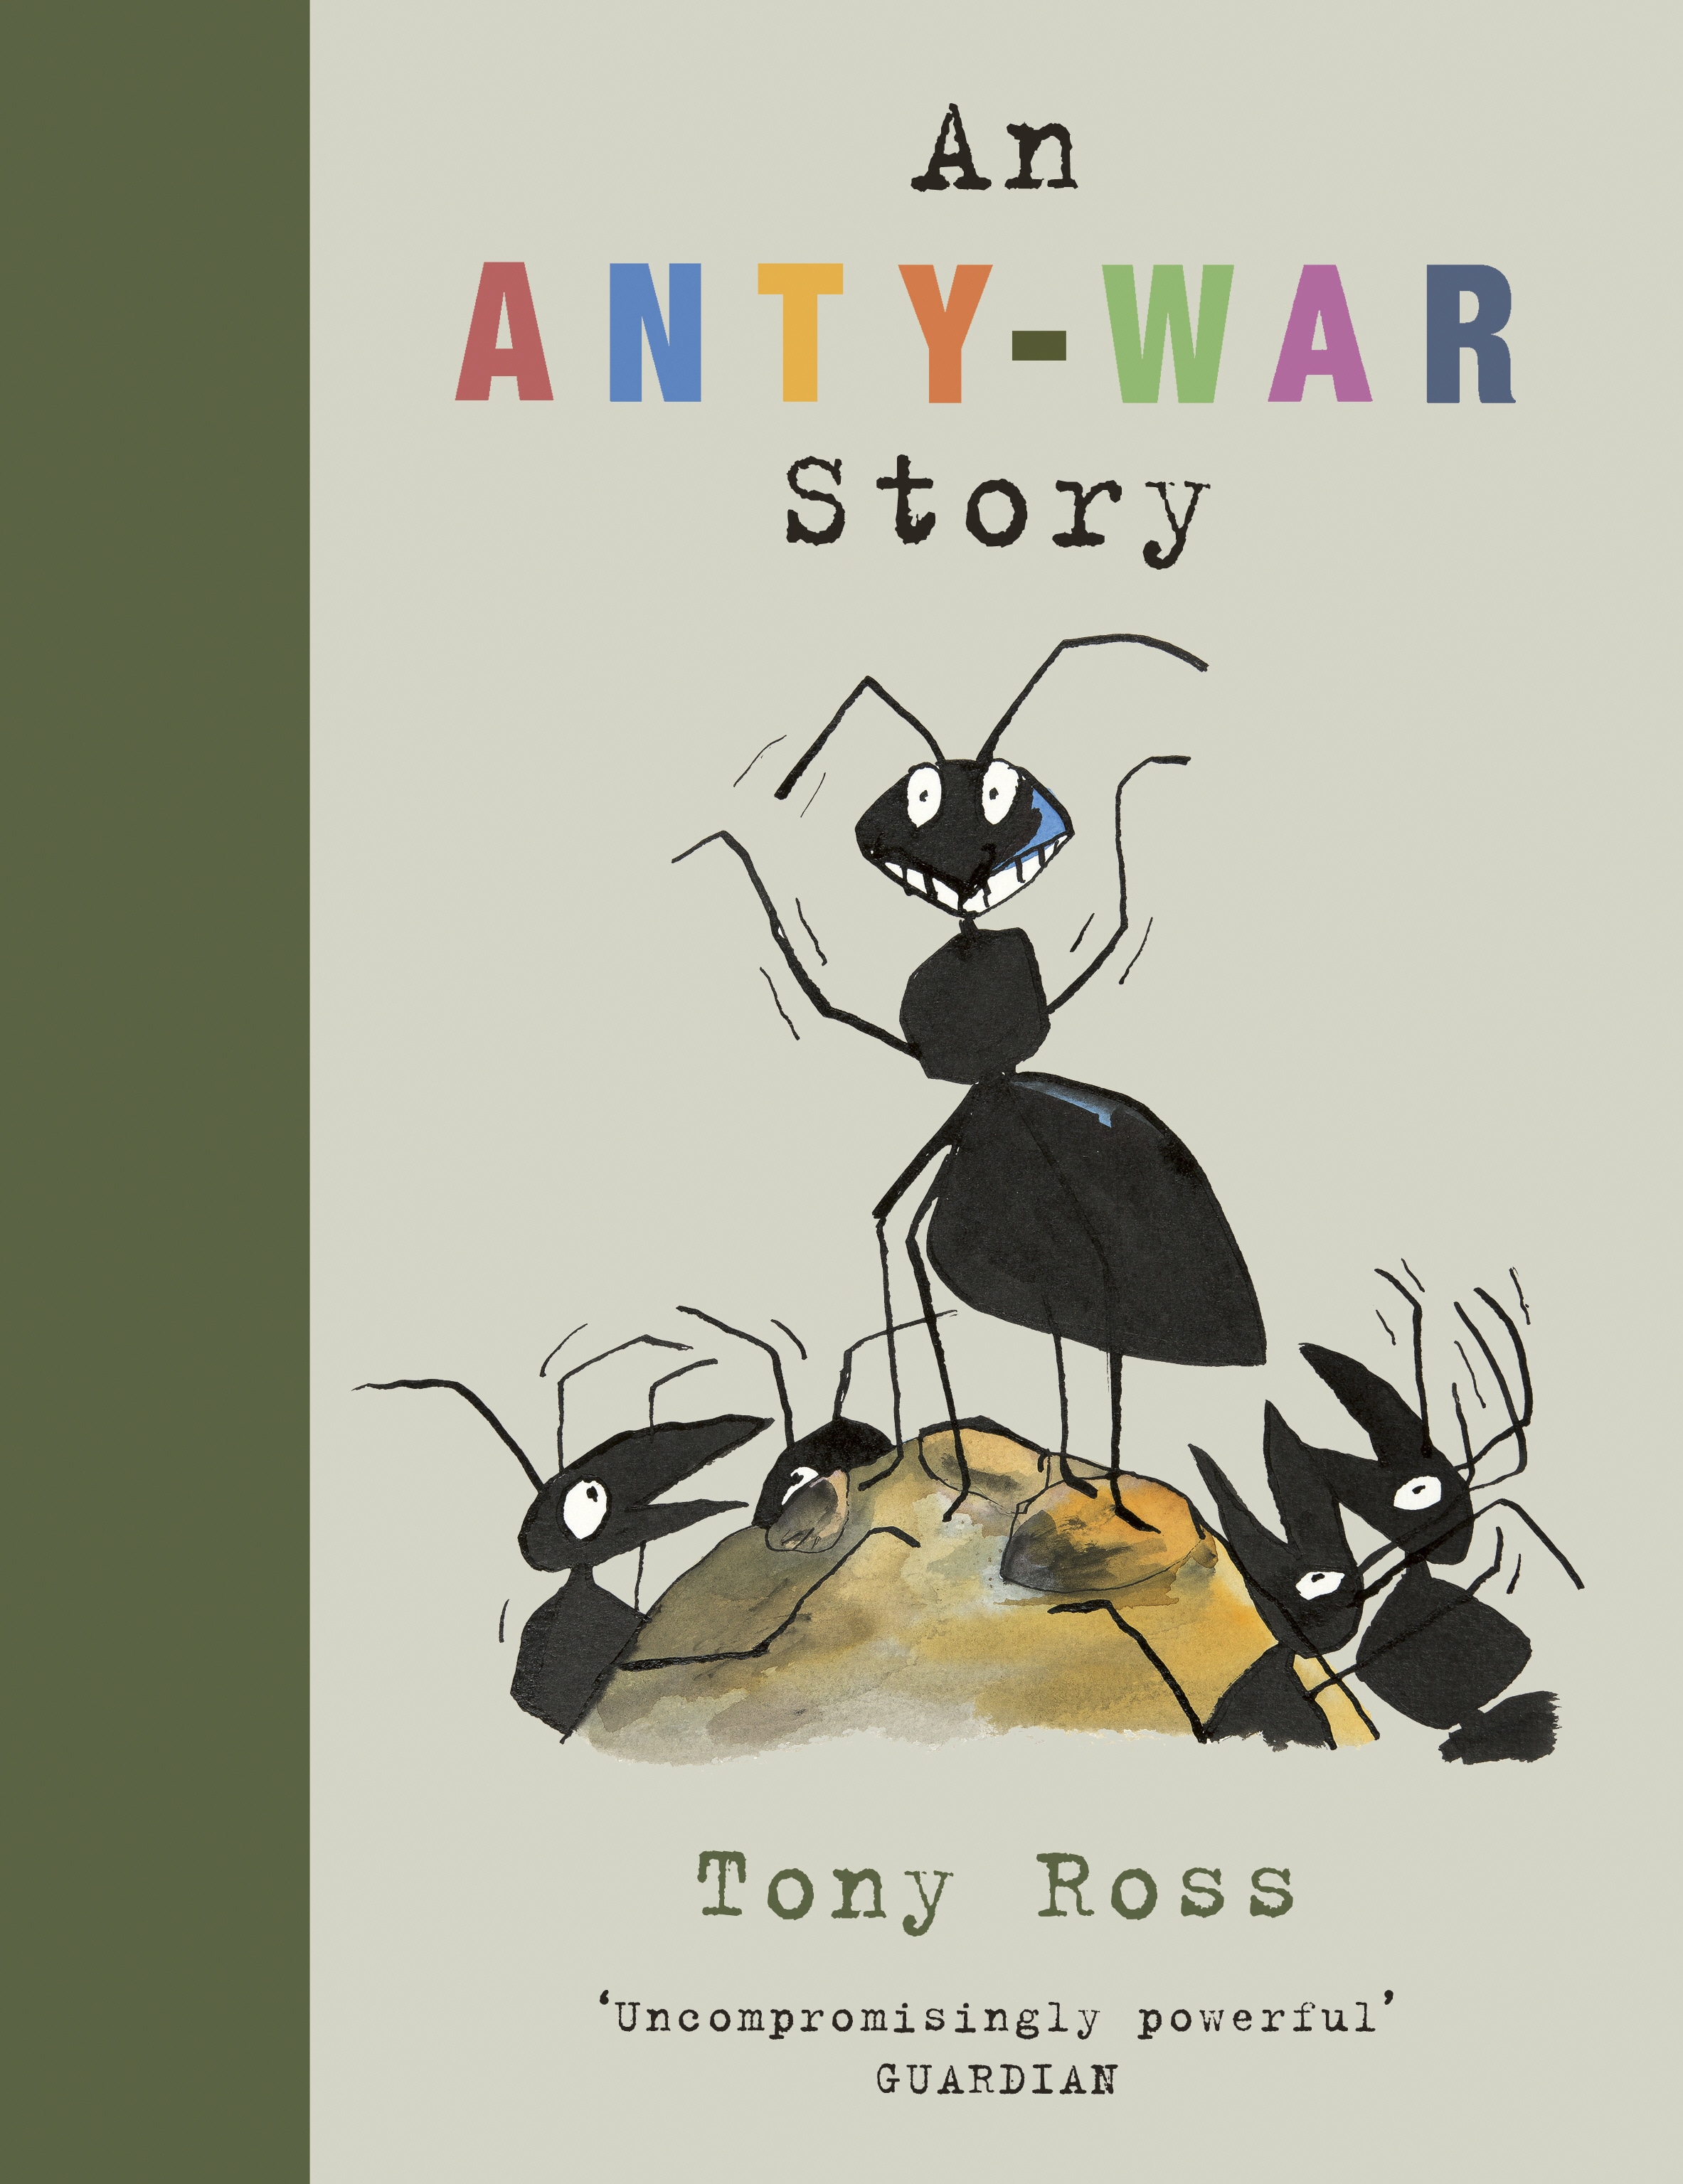 Book “An Anty-War Story” by Tony Ross — October 3, 2019